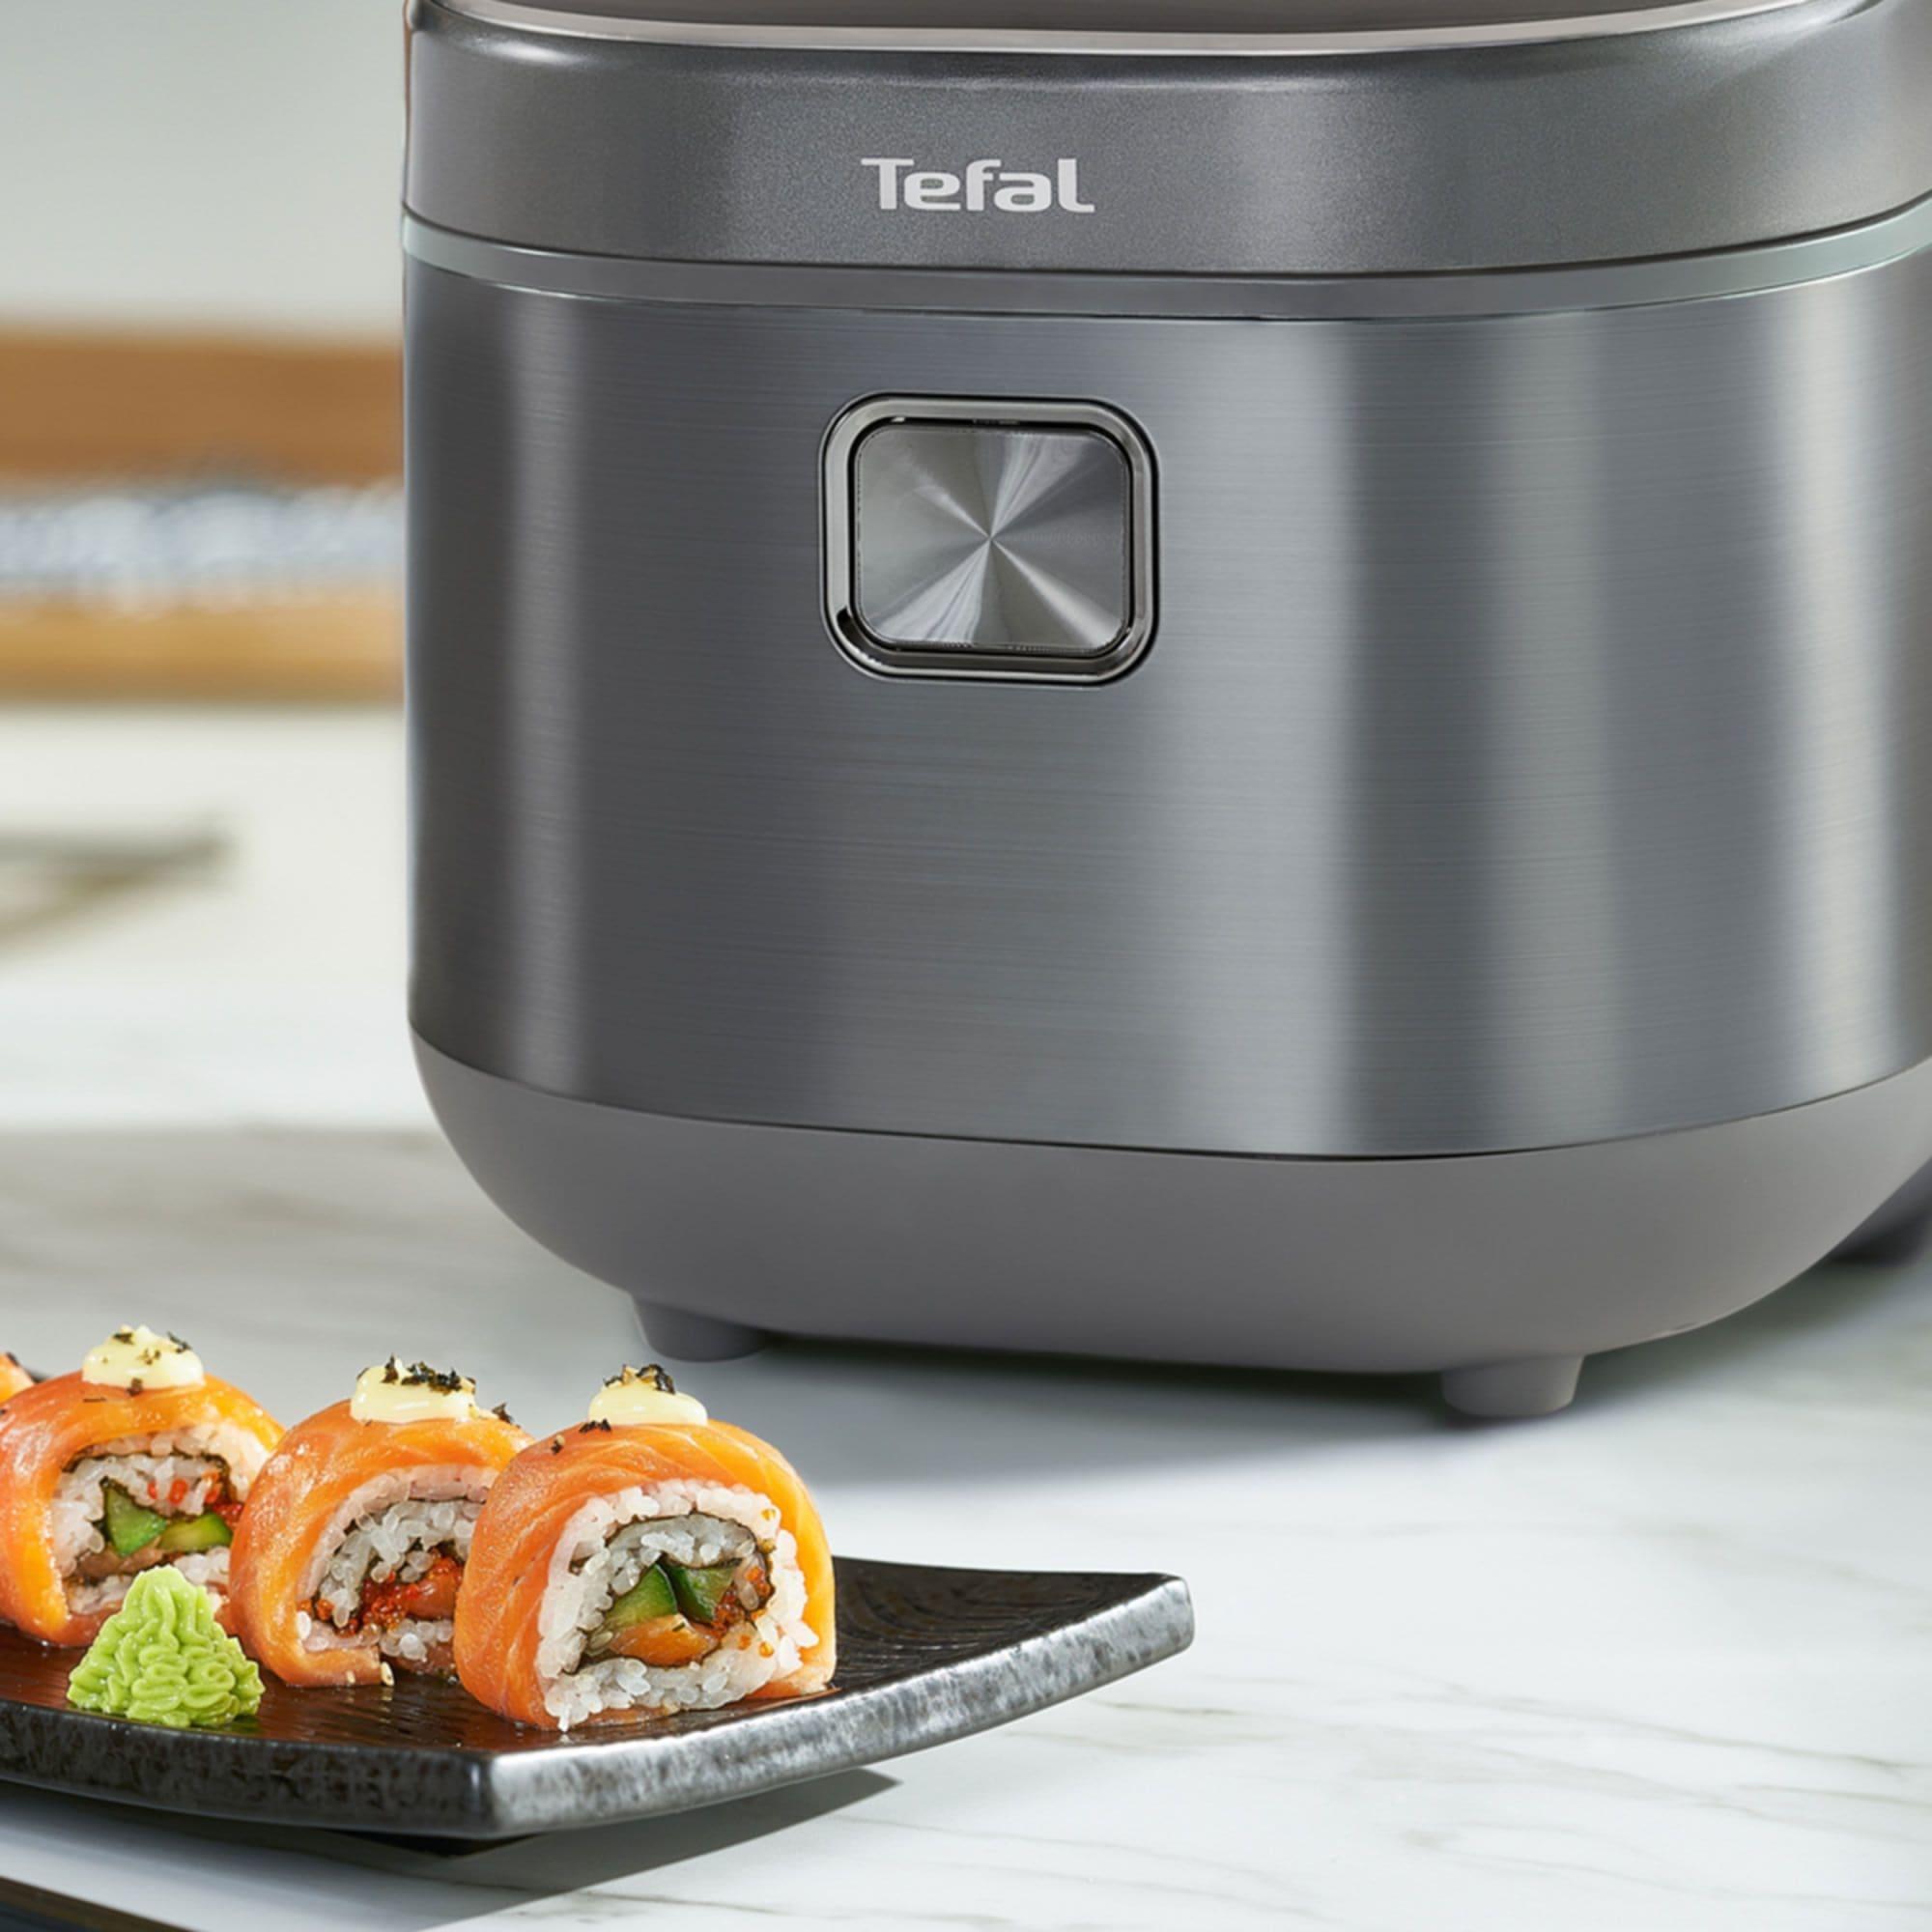 Tefal RK818 Induction Rice Master and Slow Cooker 1.8L Image 4